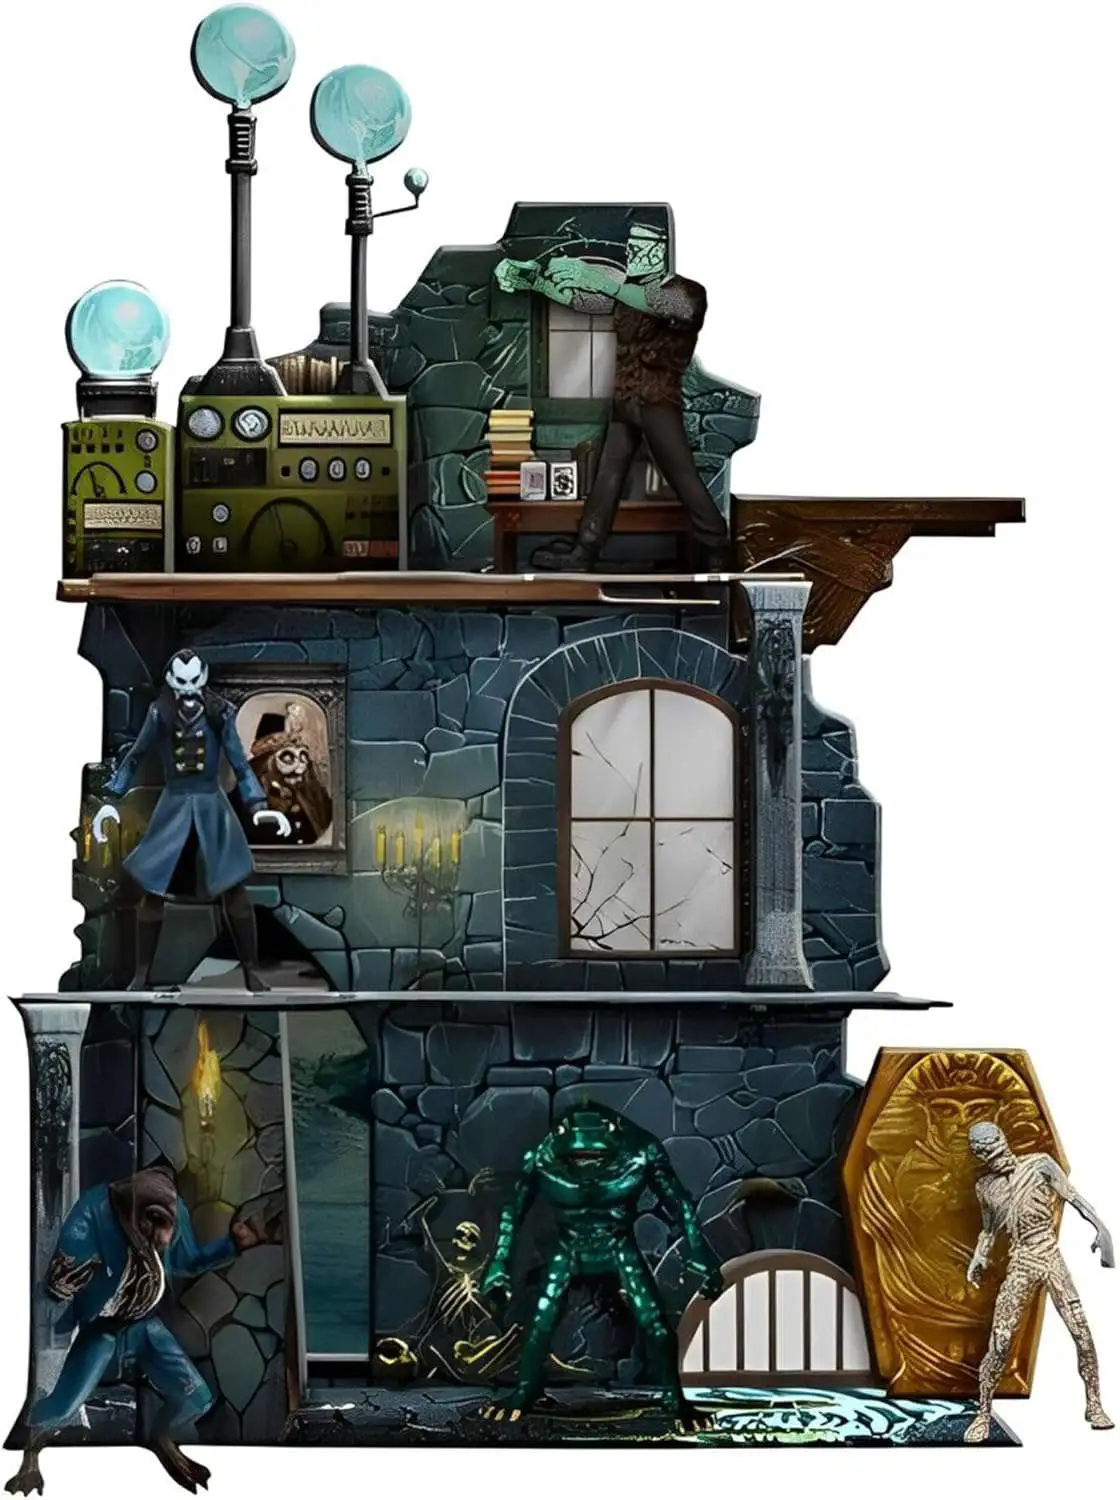 Monsters 5 Points Tower of Fear Deluxe Action Figure Boxed Set [Includes Dracula, Frankenstein's Monster, Mummy, Sea Creature & Werewolf] (Pre-Order ships July)